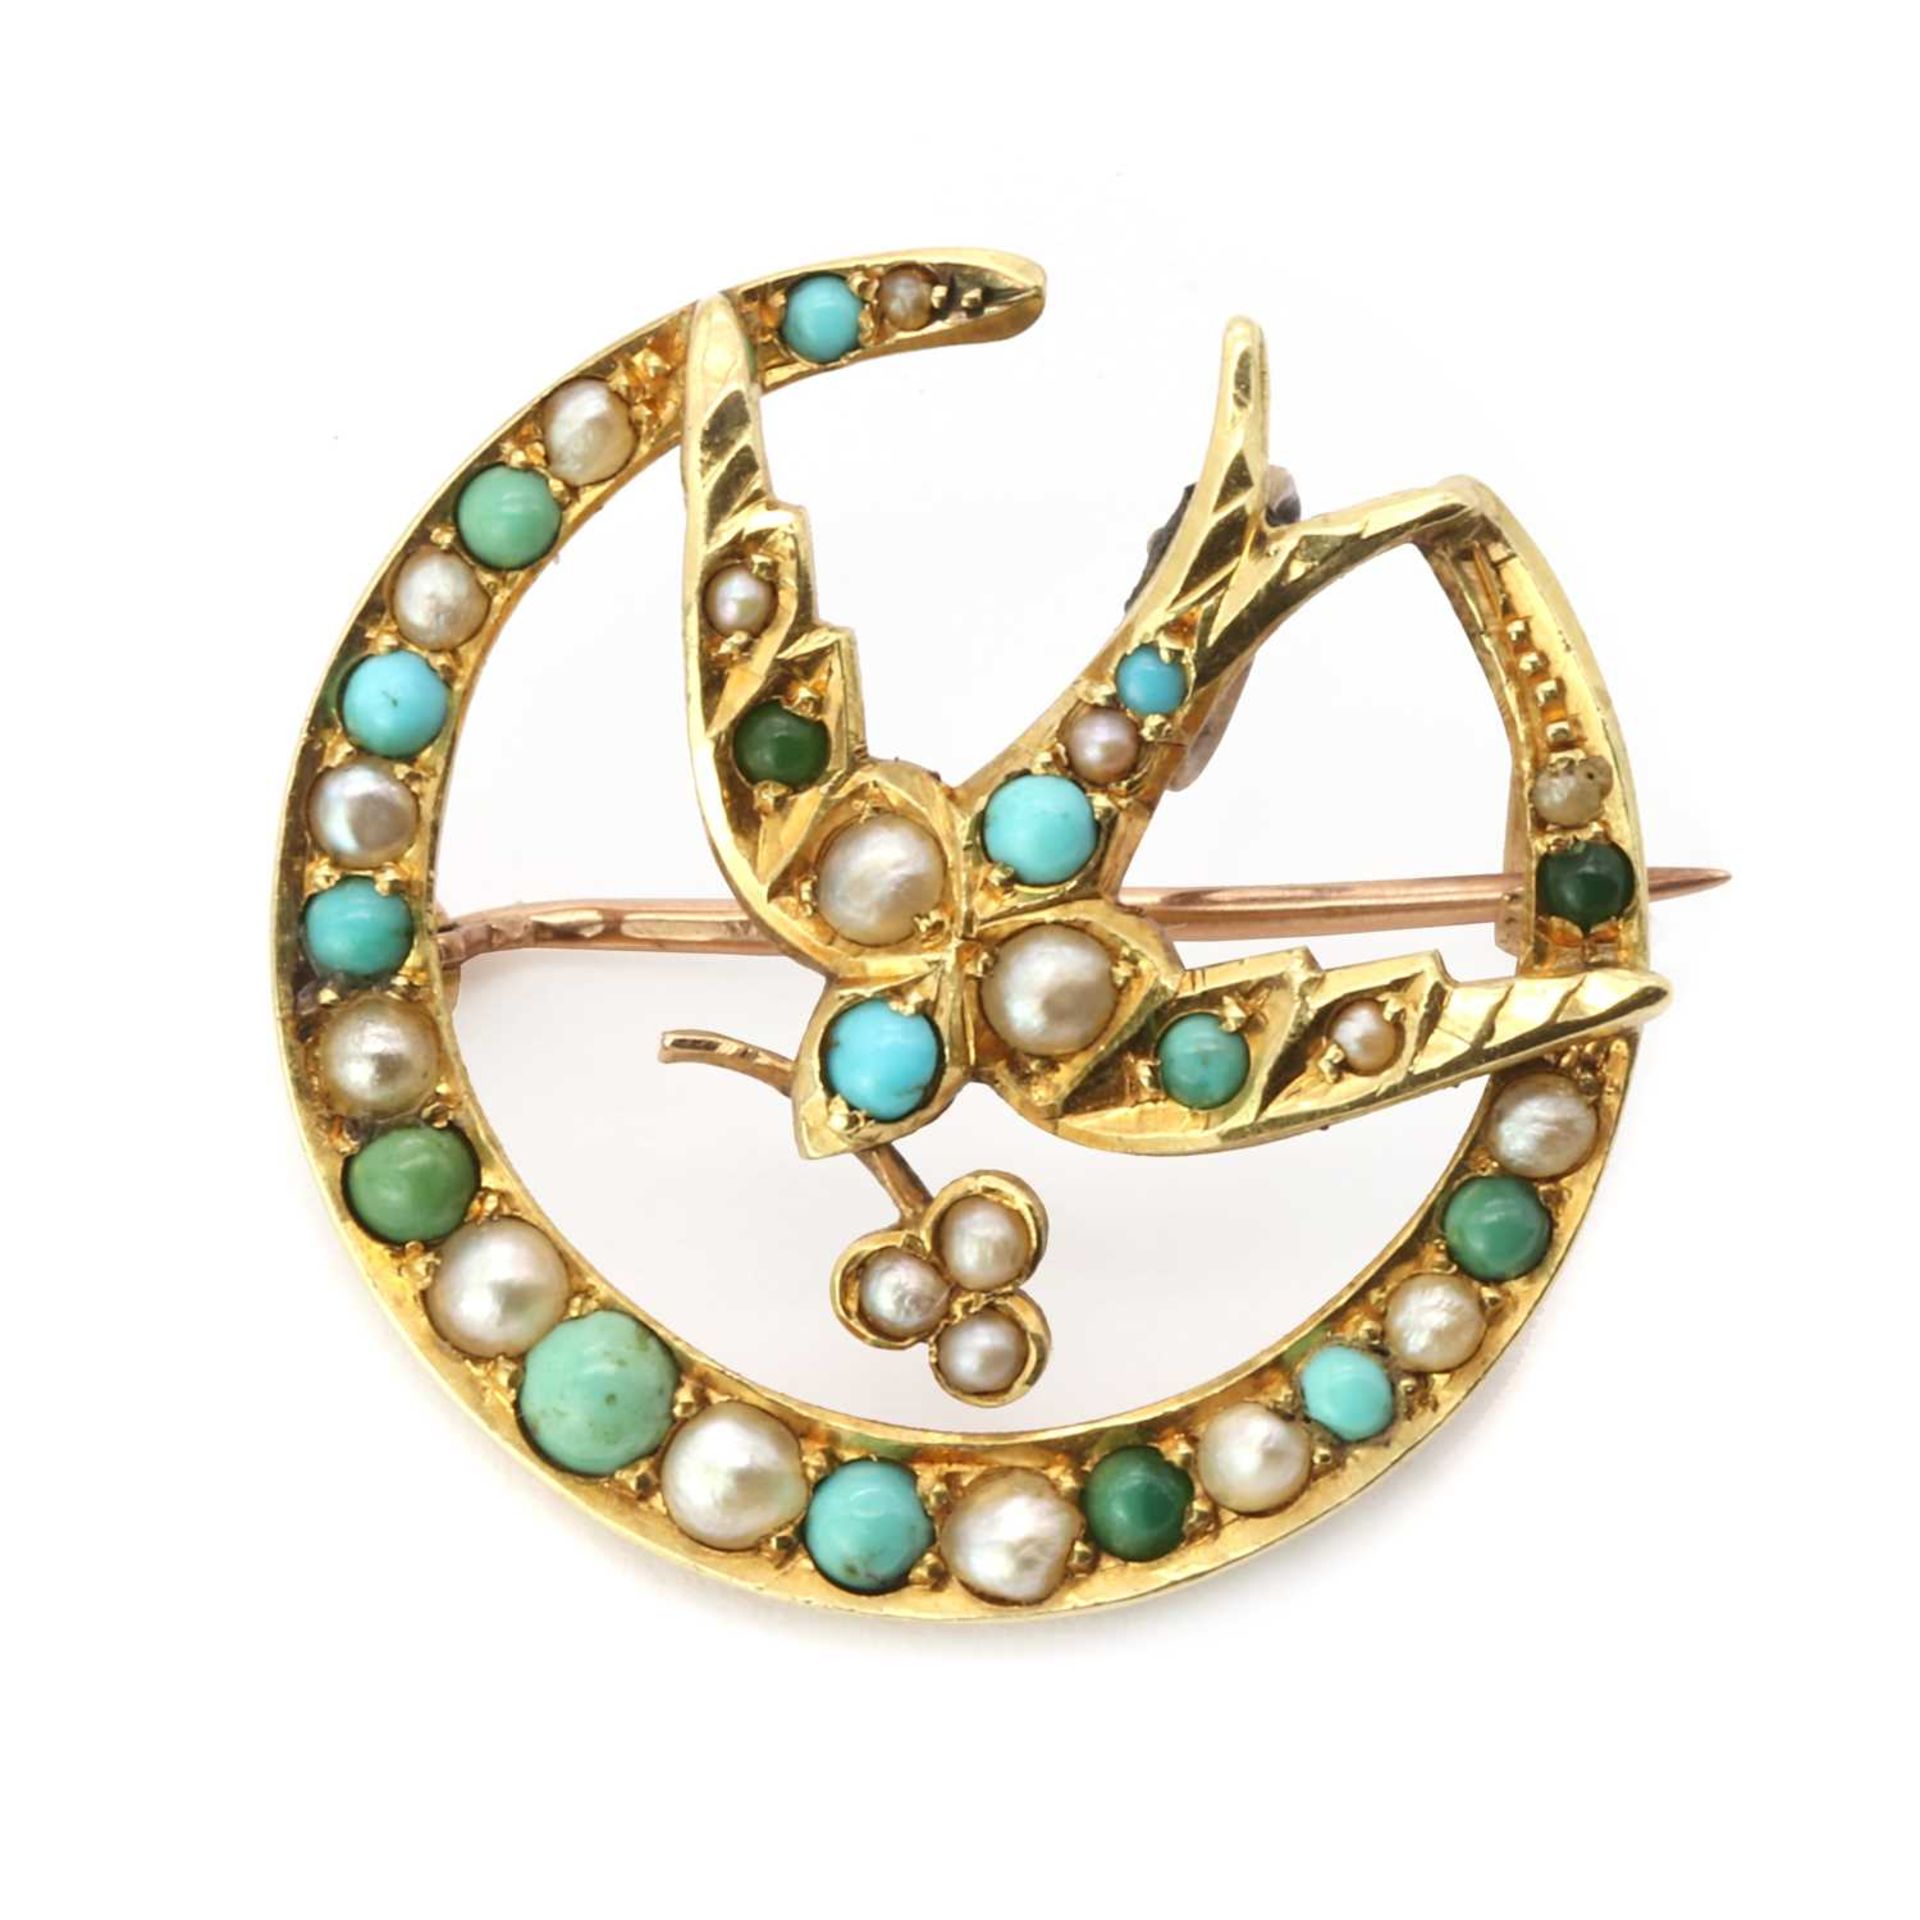 A gold swallow brooch, c1900,